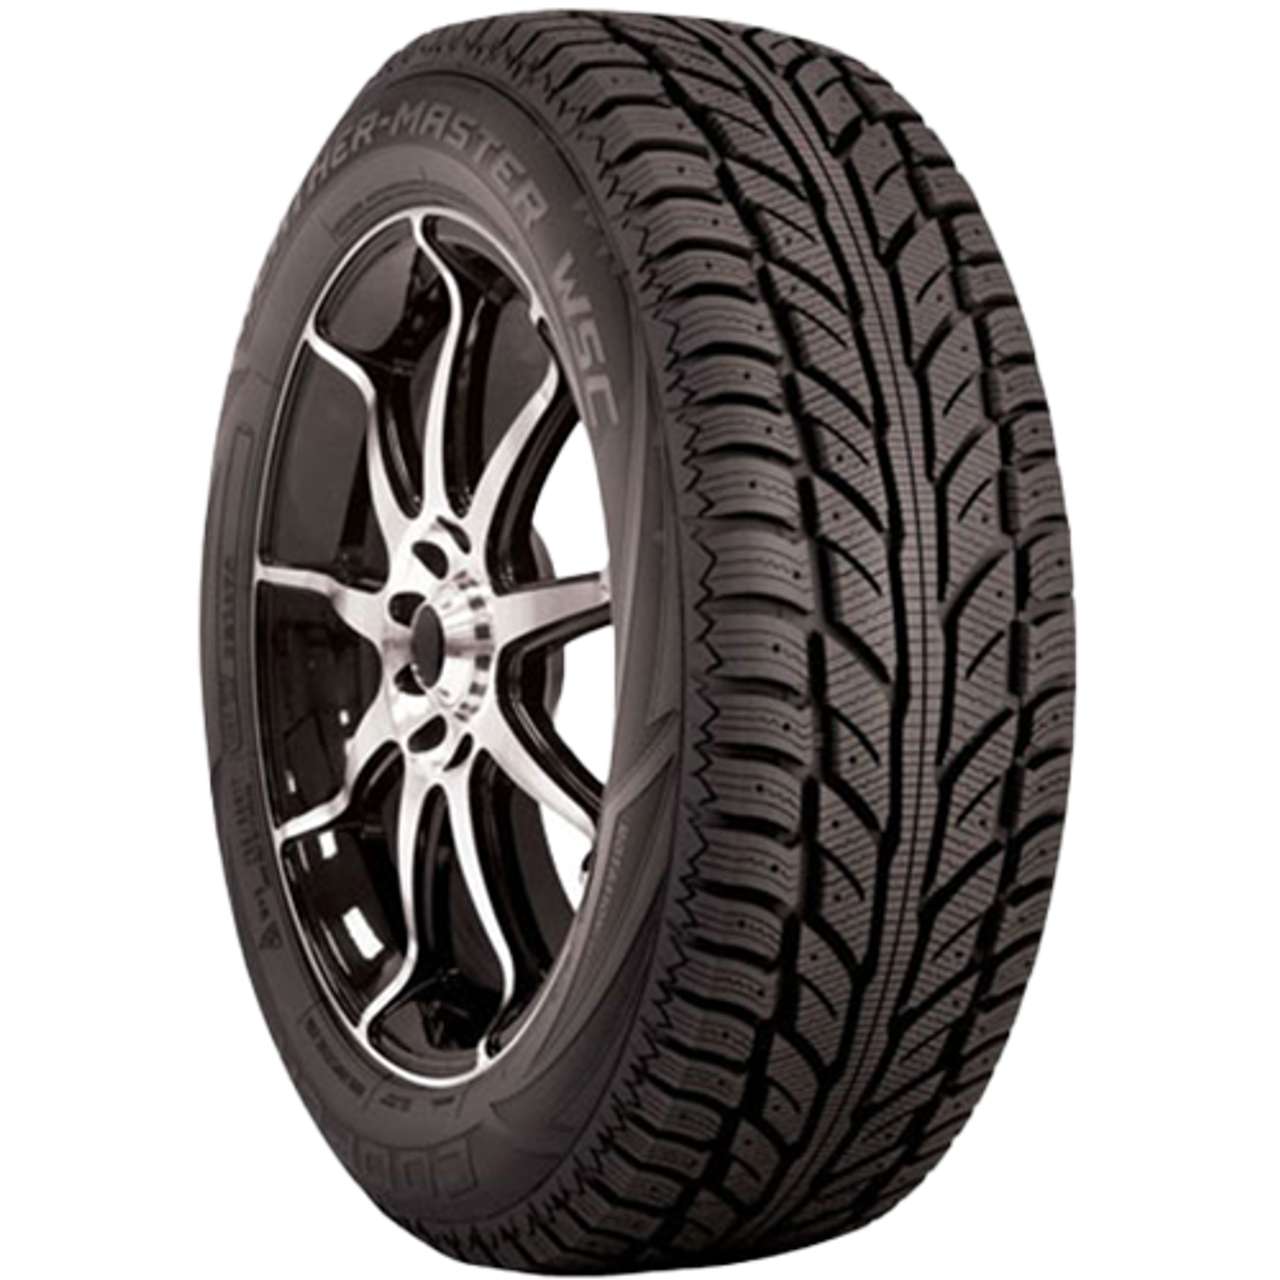 COOPER WEATHERMASTER WSC 265/60R18 110T STUDDABLE BSW